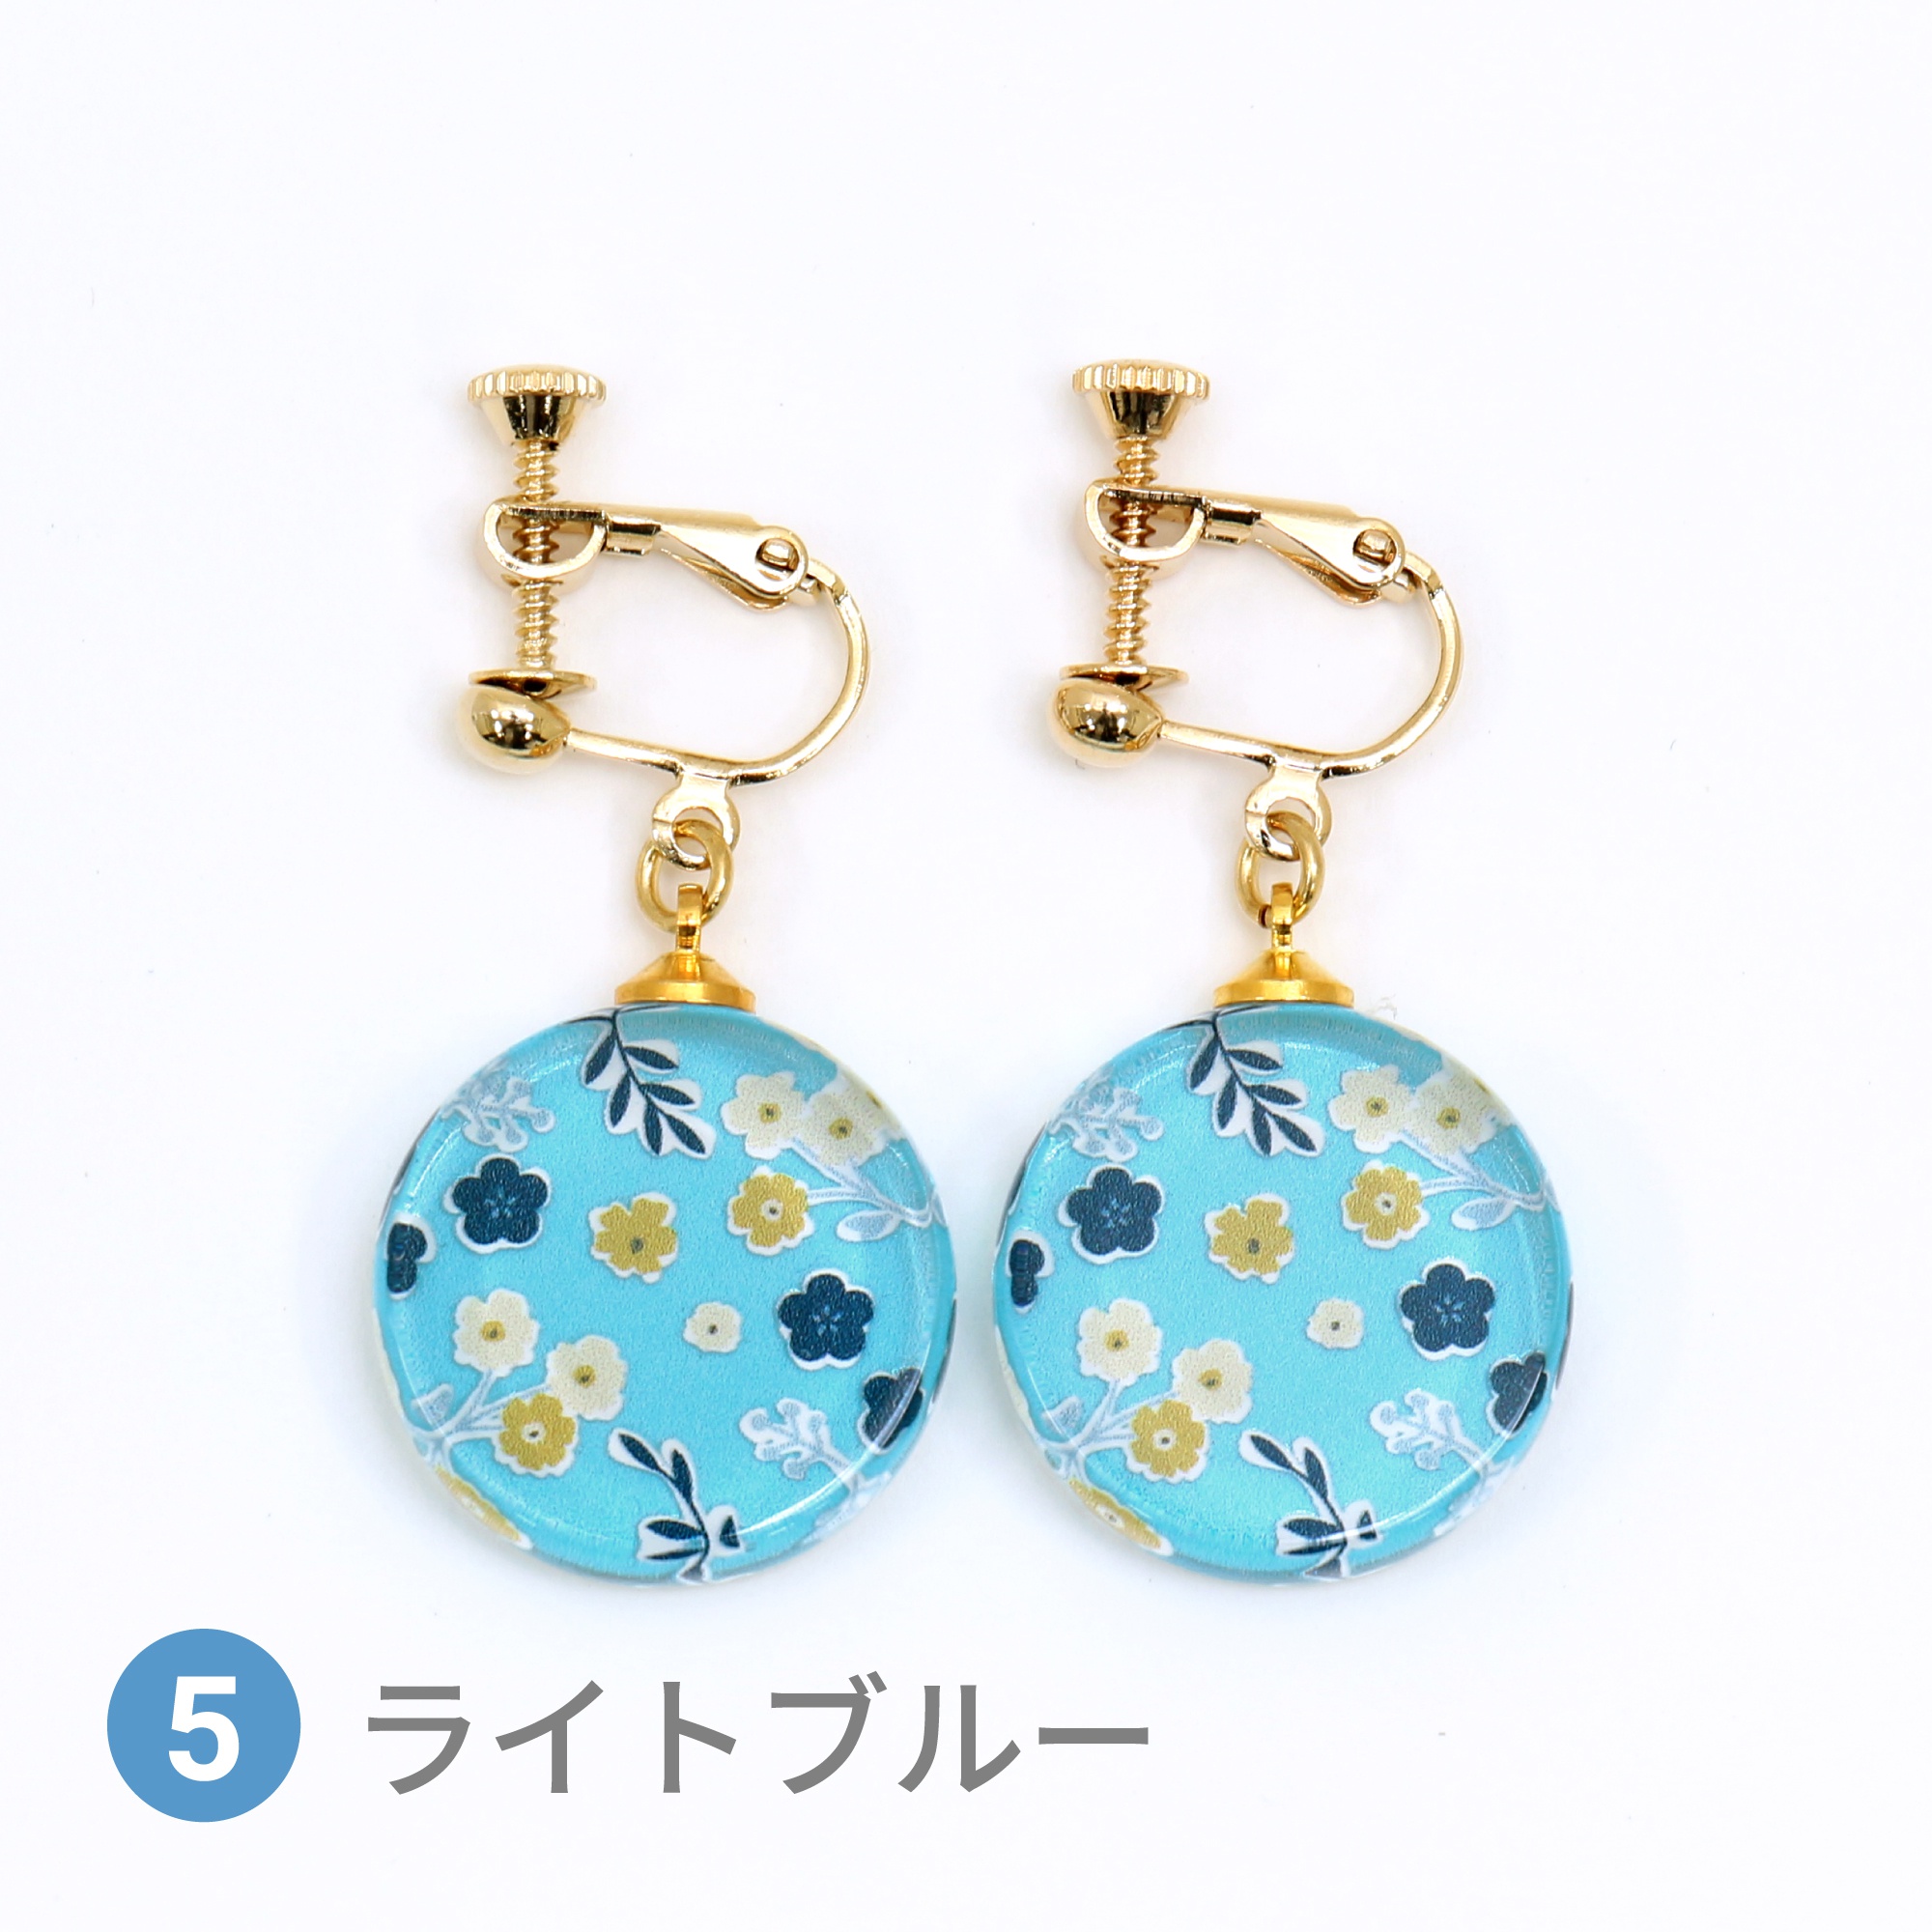 Glass accessories Earring FLORAL PATTERN lightblue round shape